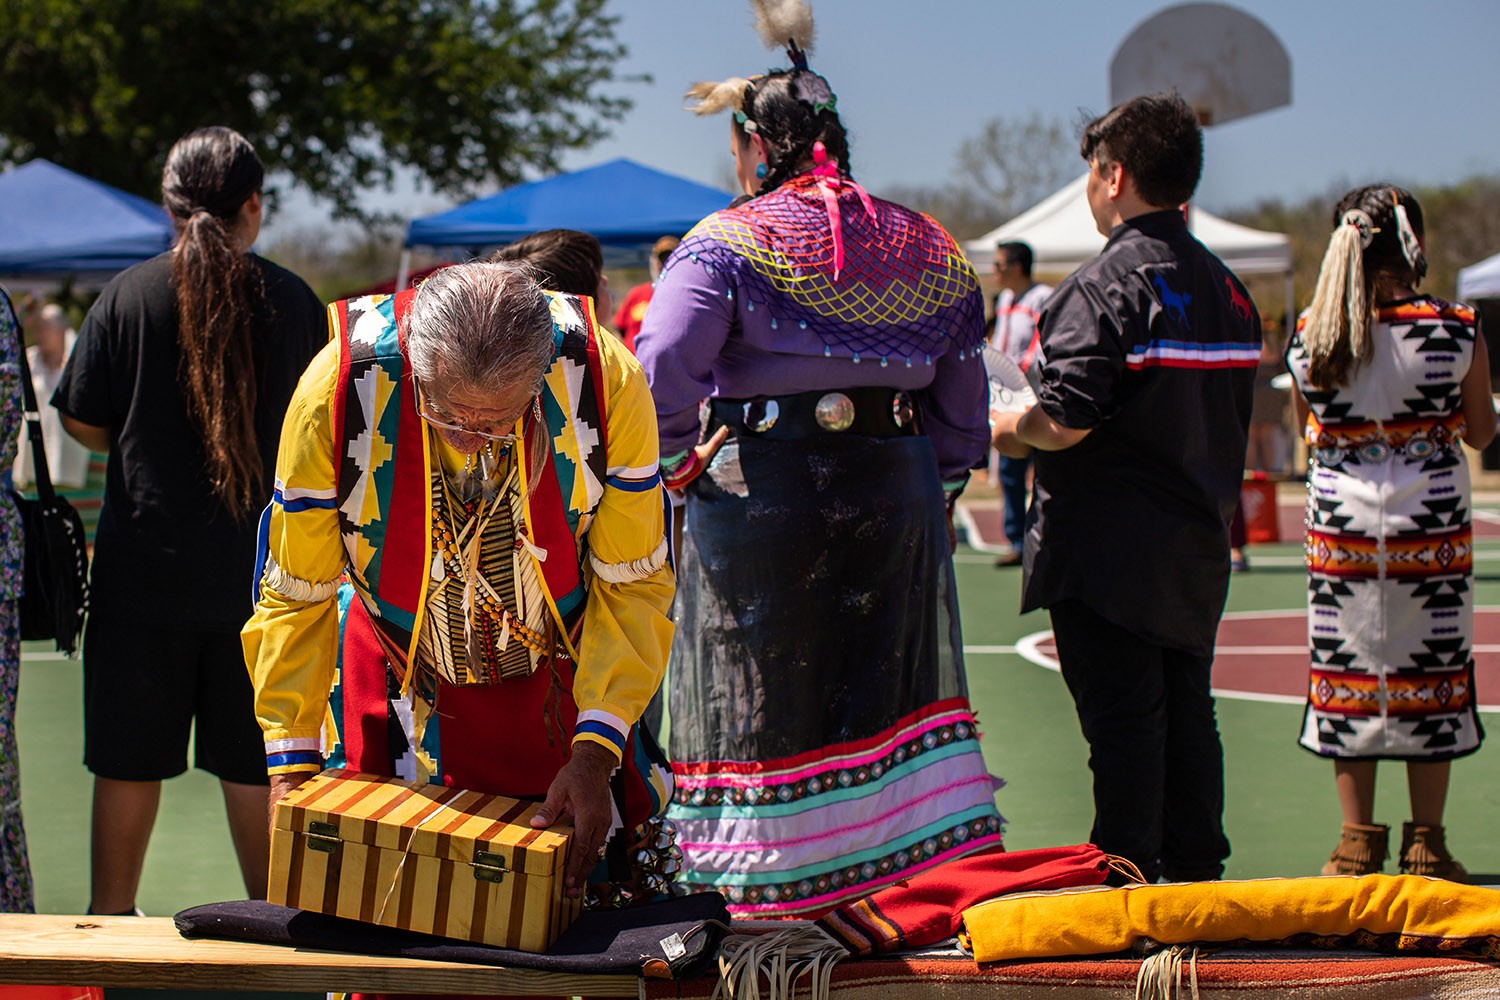 Marcus Cheko packs up his belongings at a Native American Fiesta Pow Wow including various feathers and blankets at Mission County Park #2, San Antonio, Texas. Photo by Kaylee Greenlee Beal | Heron contributor